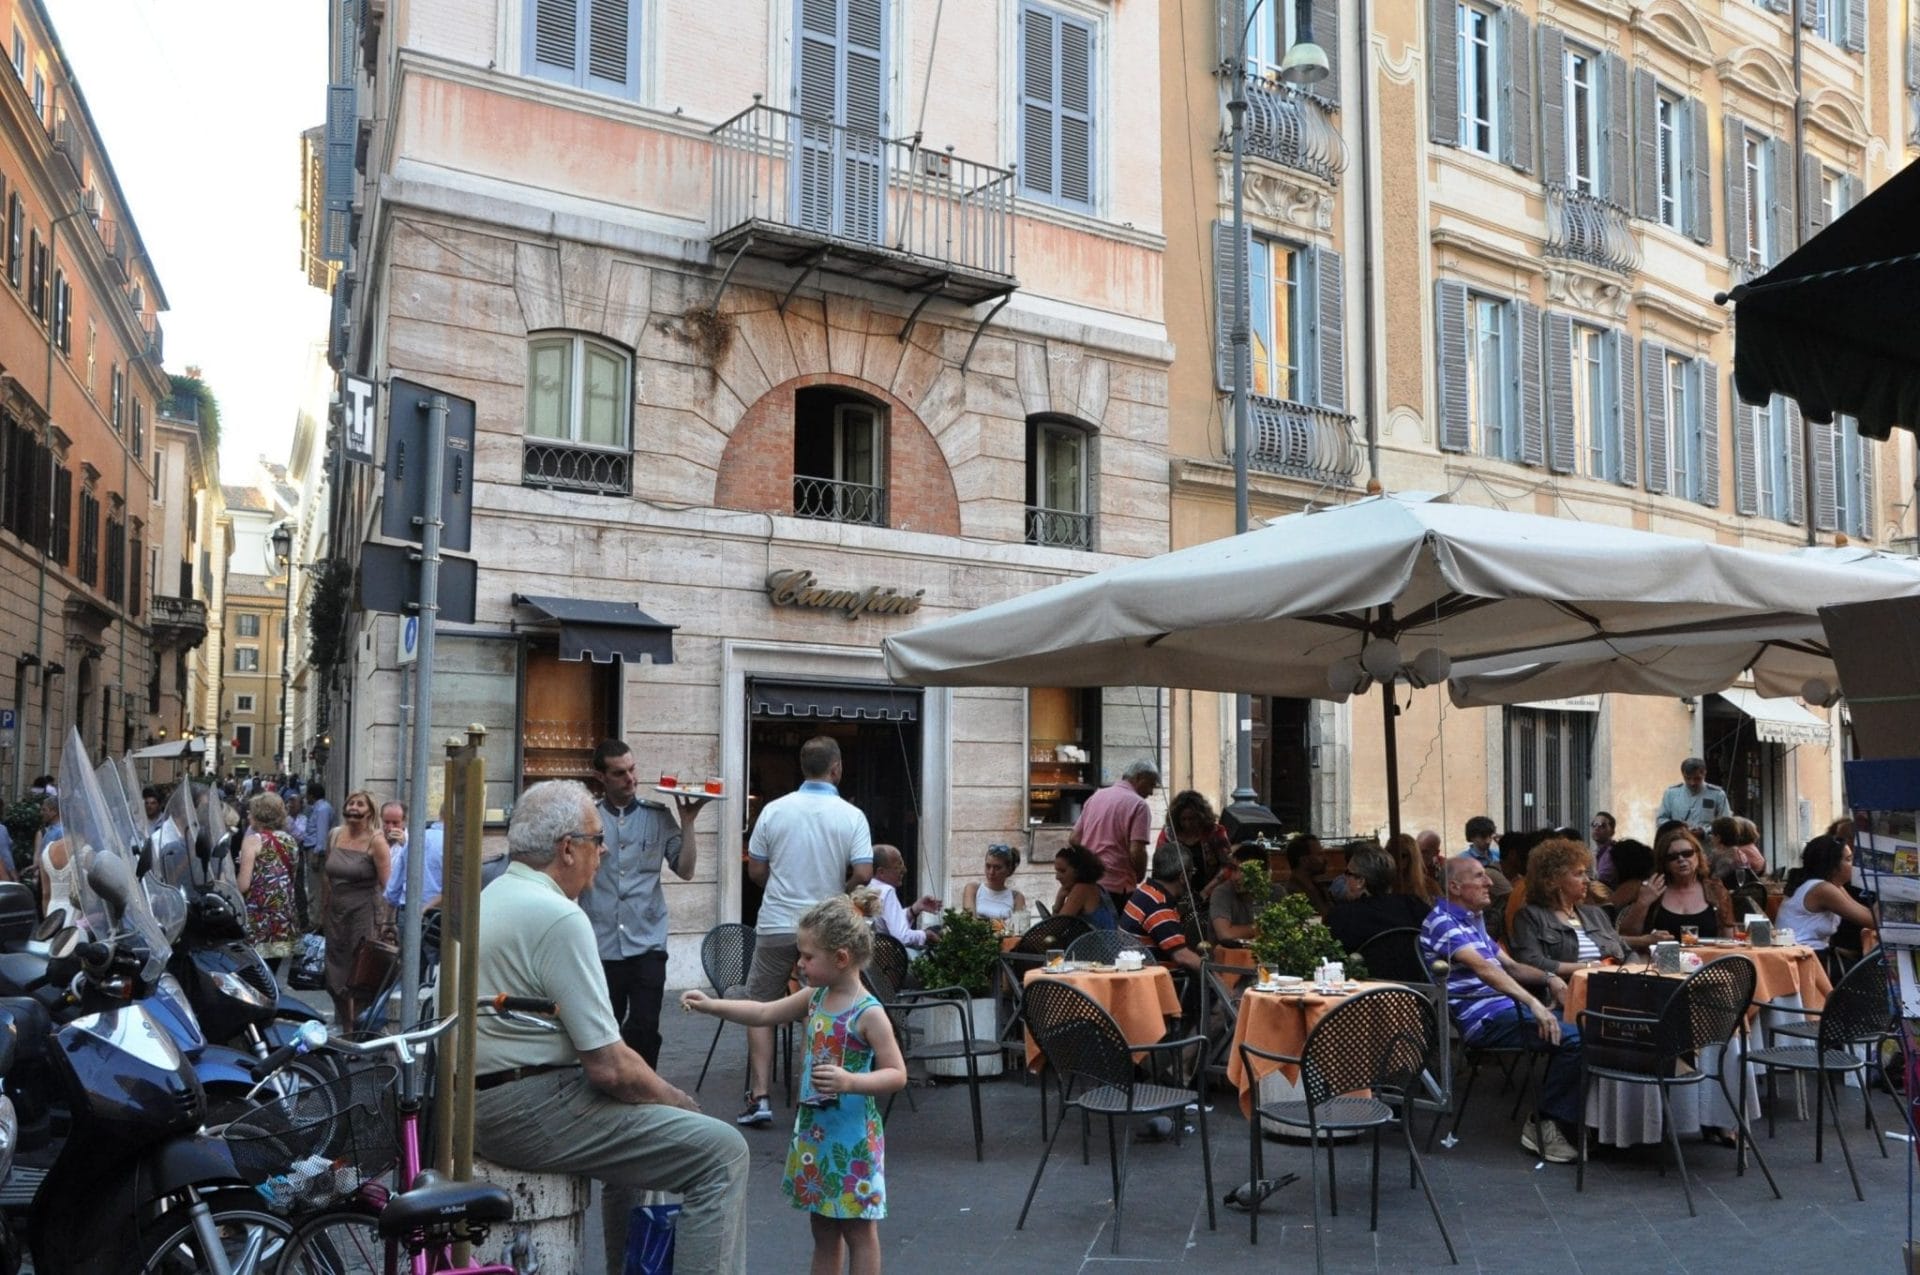 Get some of Italy's best gelato at this pretty piazza